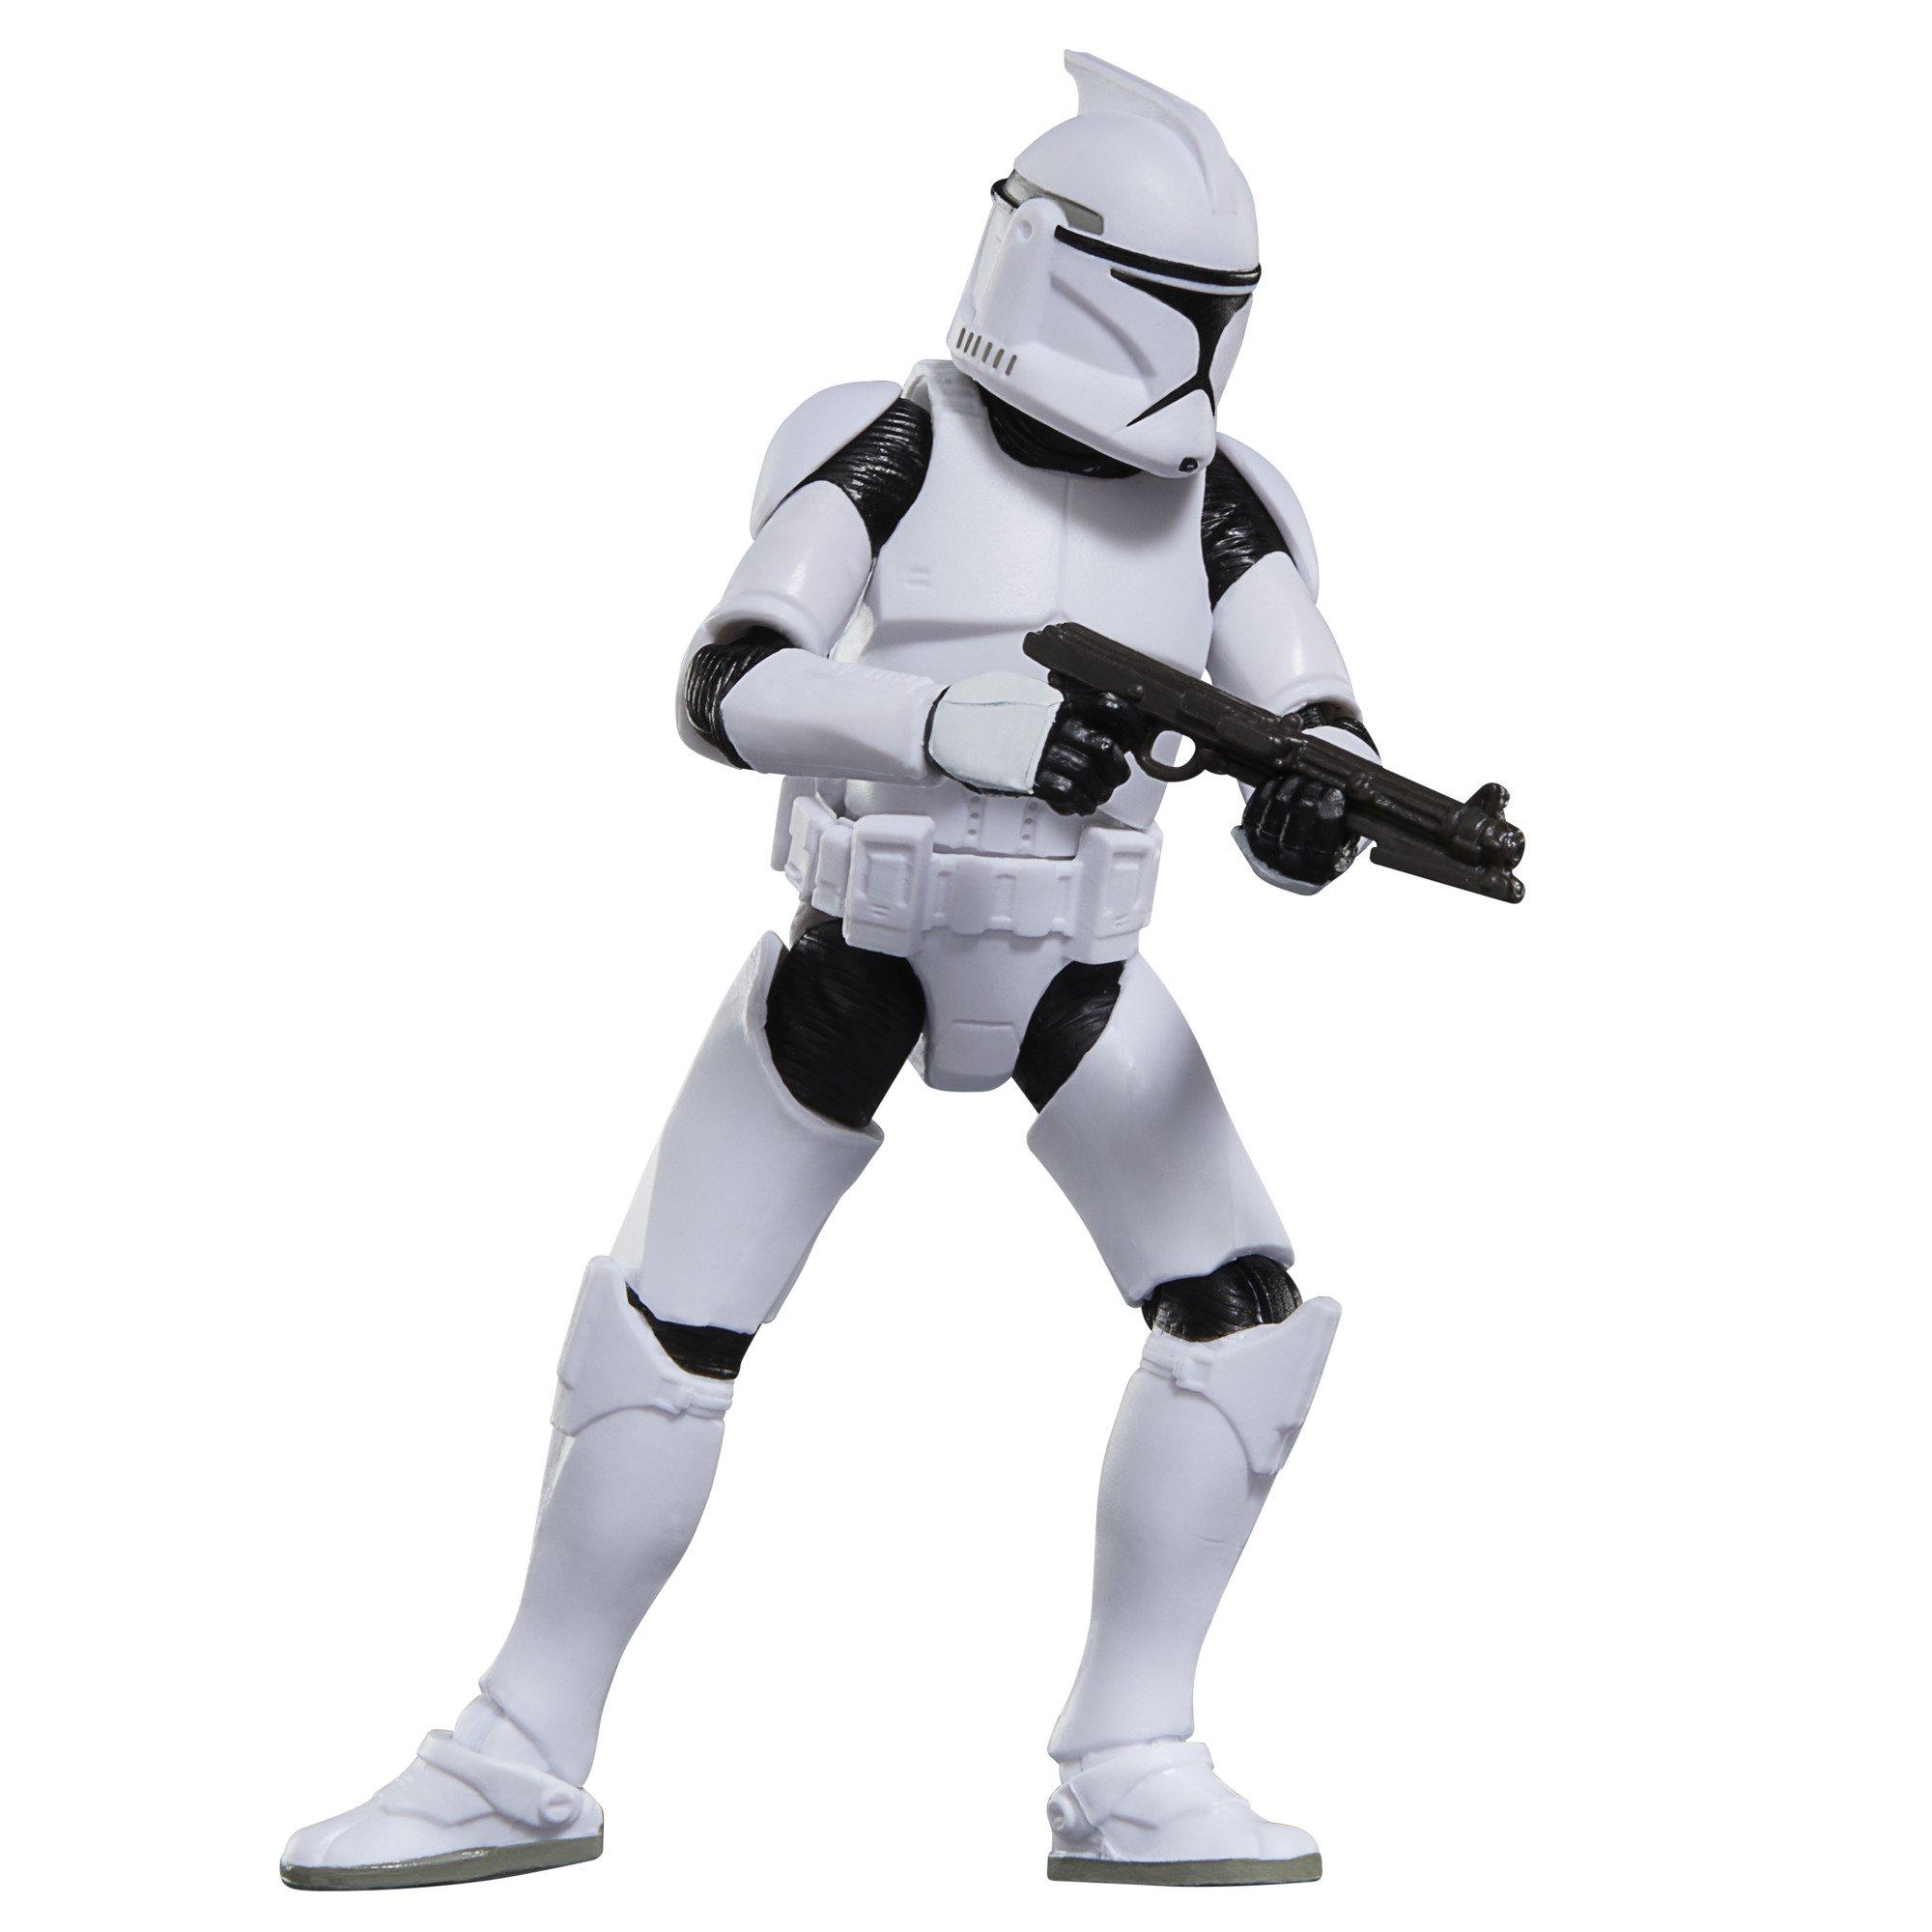 Hasbro Star Wars: The Black Series Star Wars: Attack of the Clones - Clone Trooper 3.75-in Action Figure